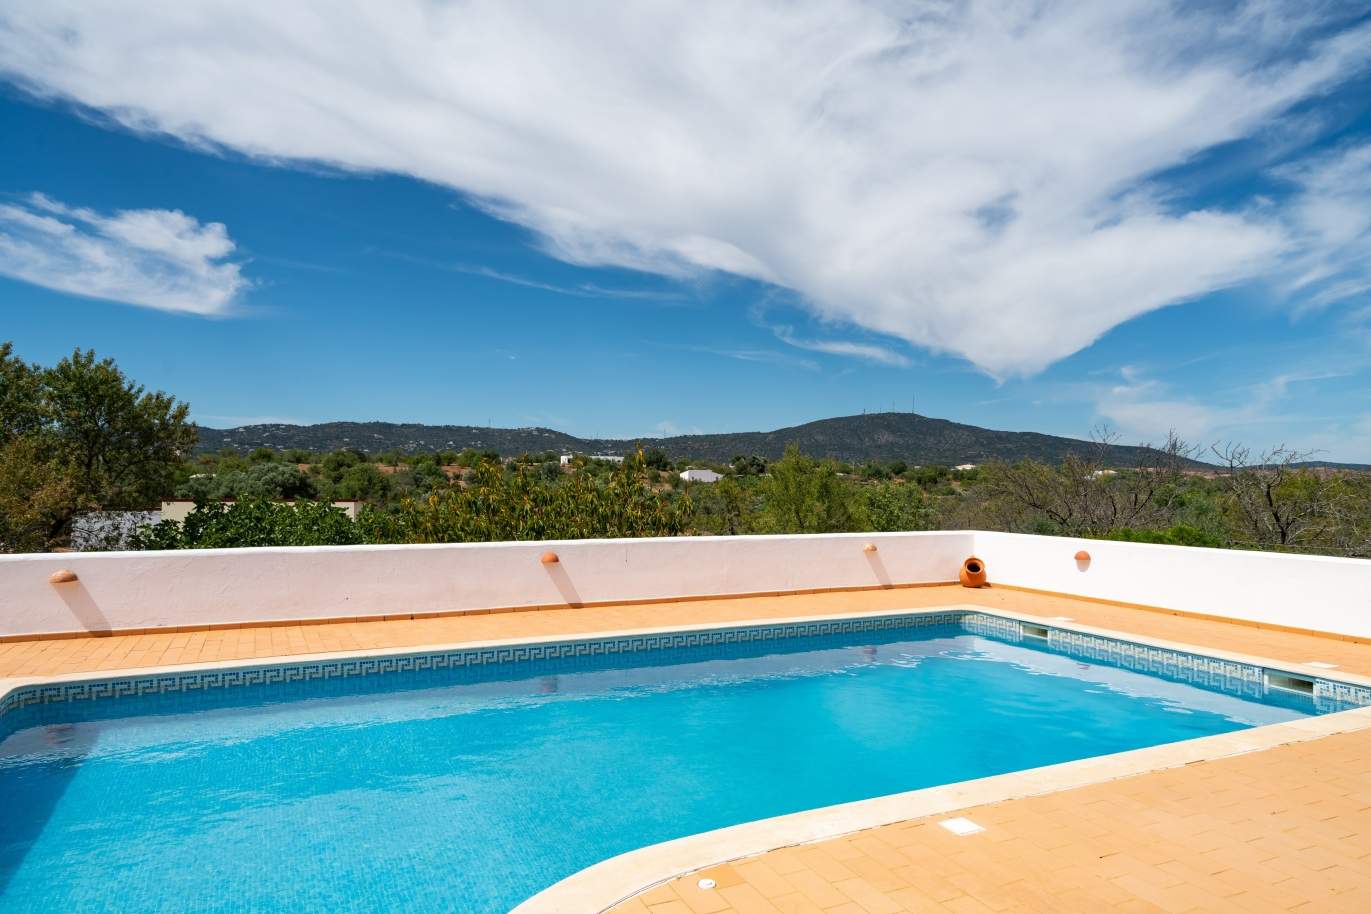 4 Bedroom Villa with Swimming Pool, for sale, Quelfes, Olhão, Algarve_144155